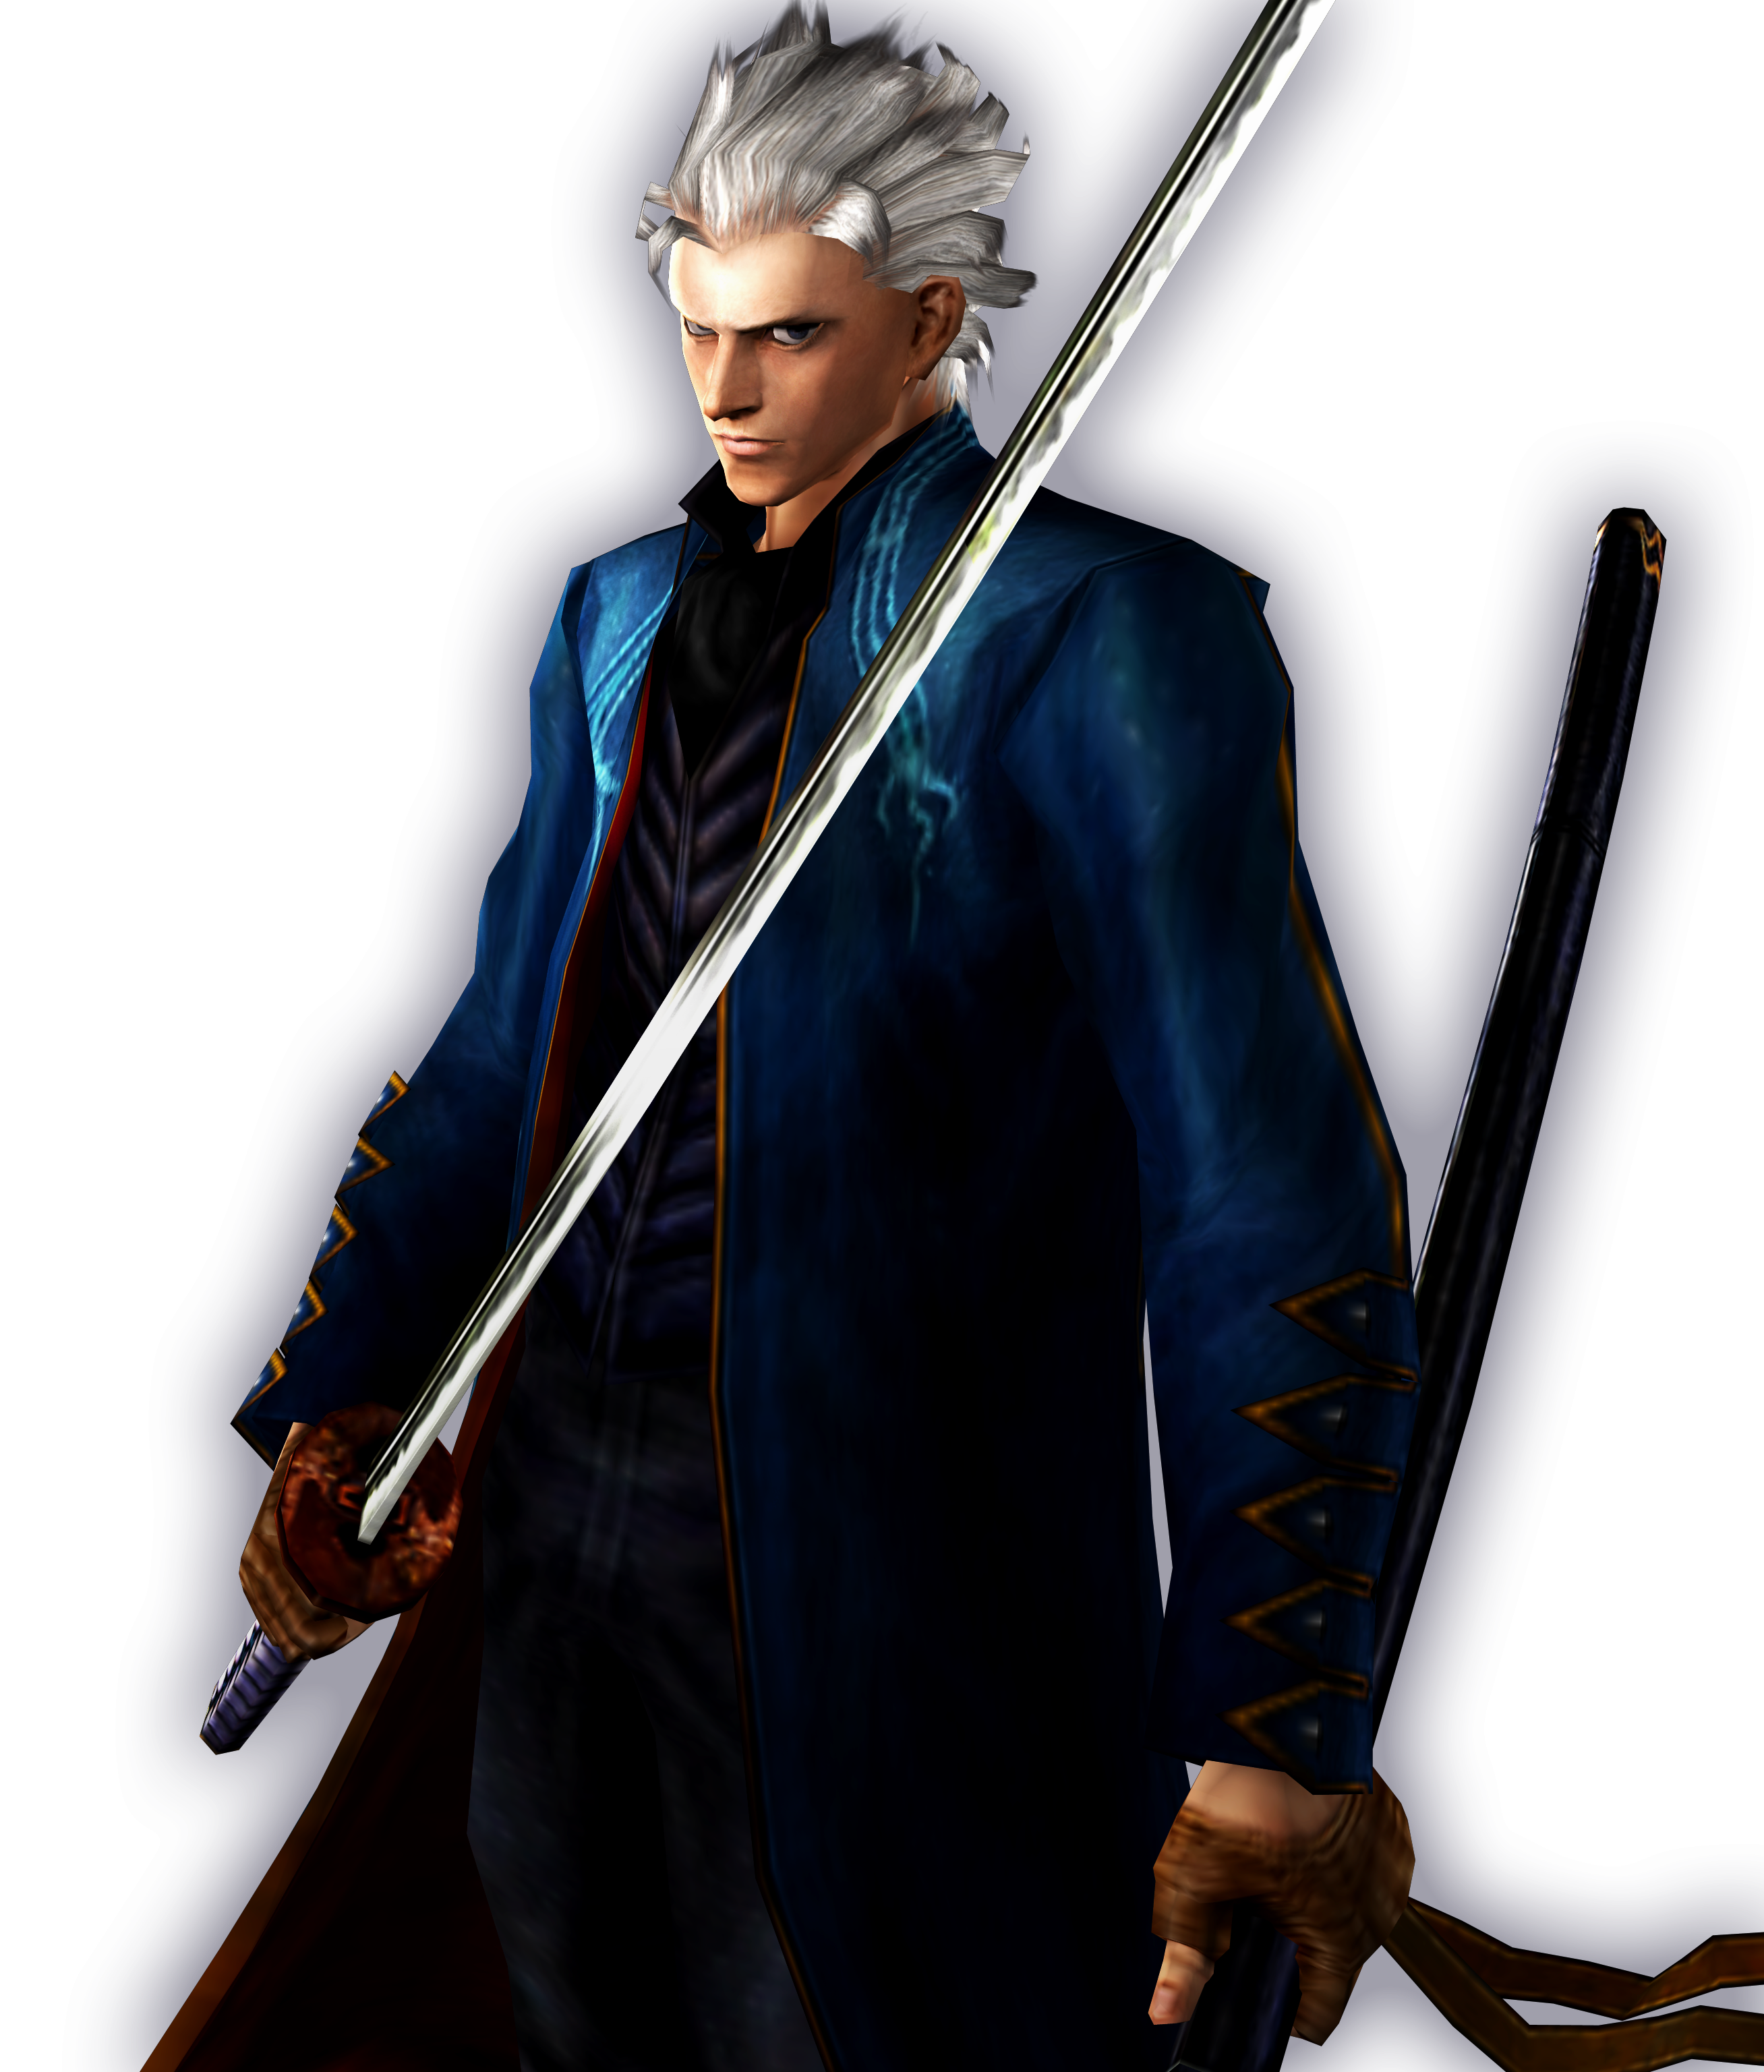 http://vignette3.wikia.nocookie.net/devilmaycry/images/8/89/Vergil.png/revision/latest?cb=20120524135152